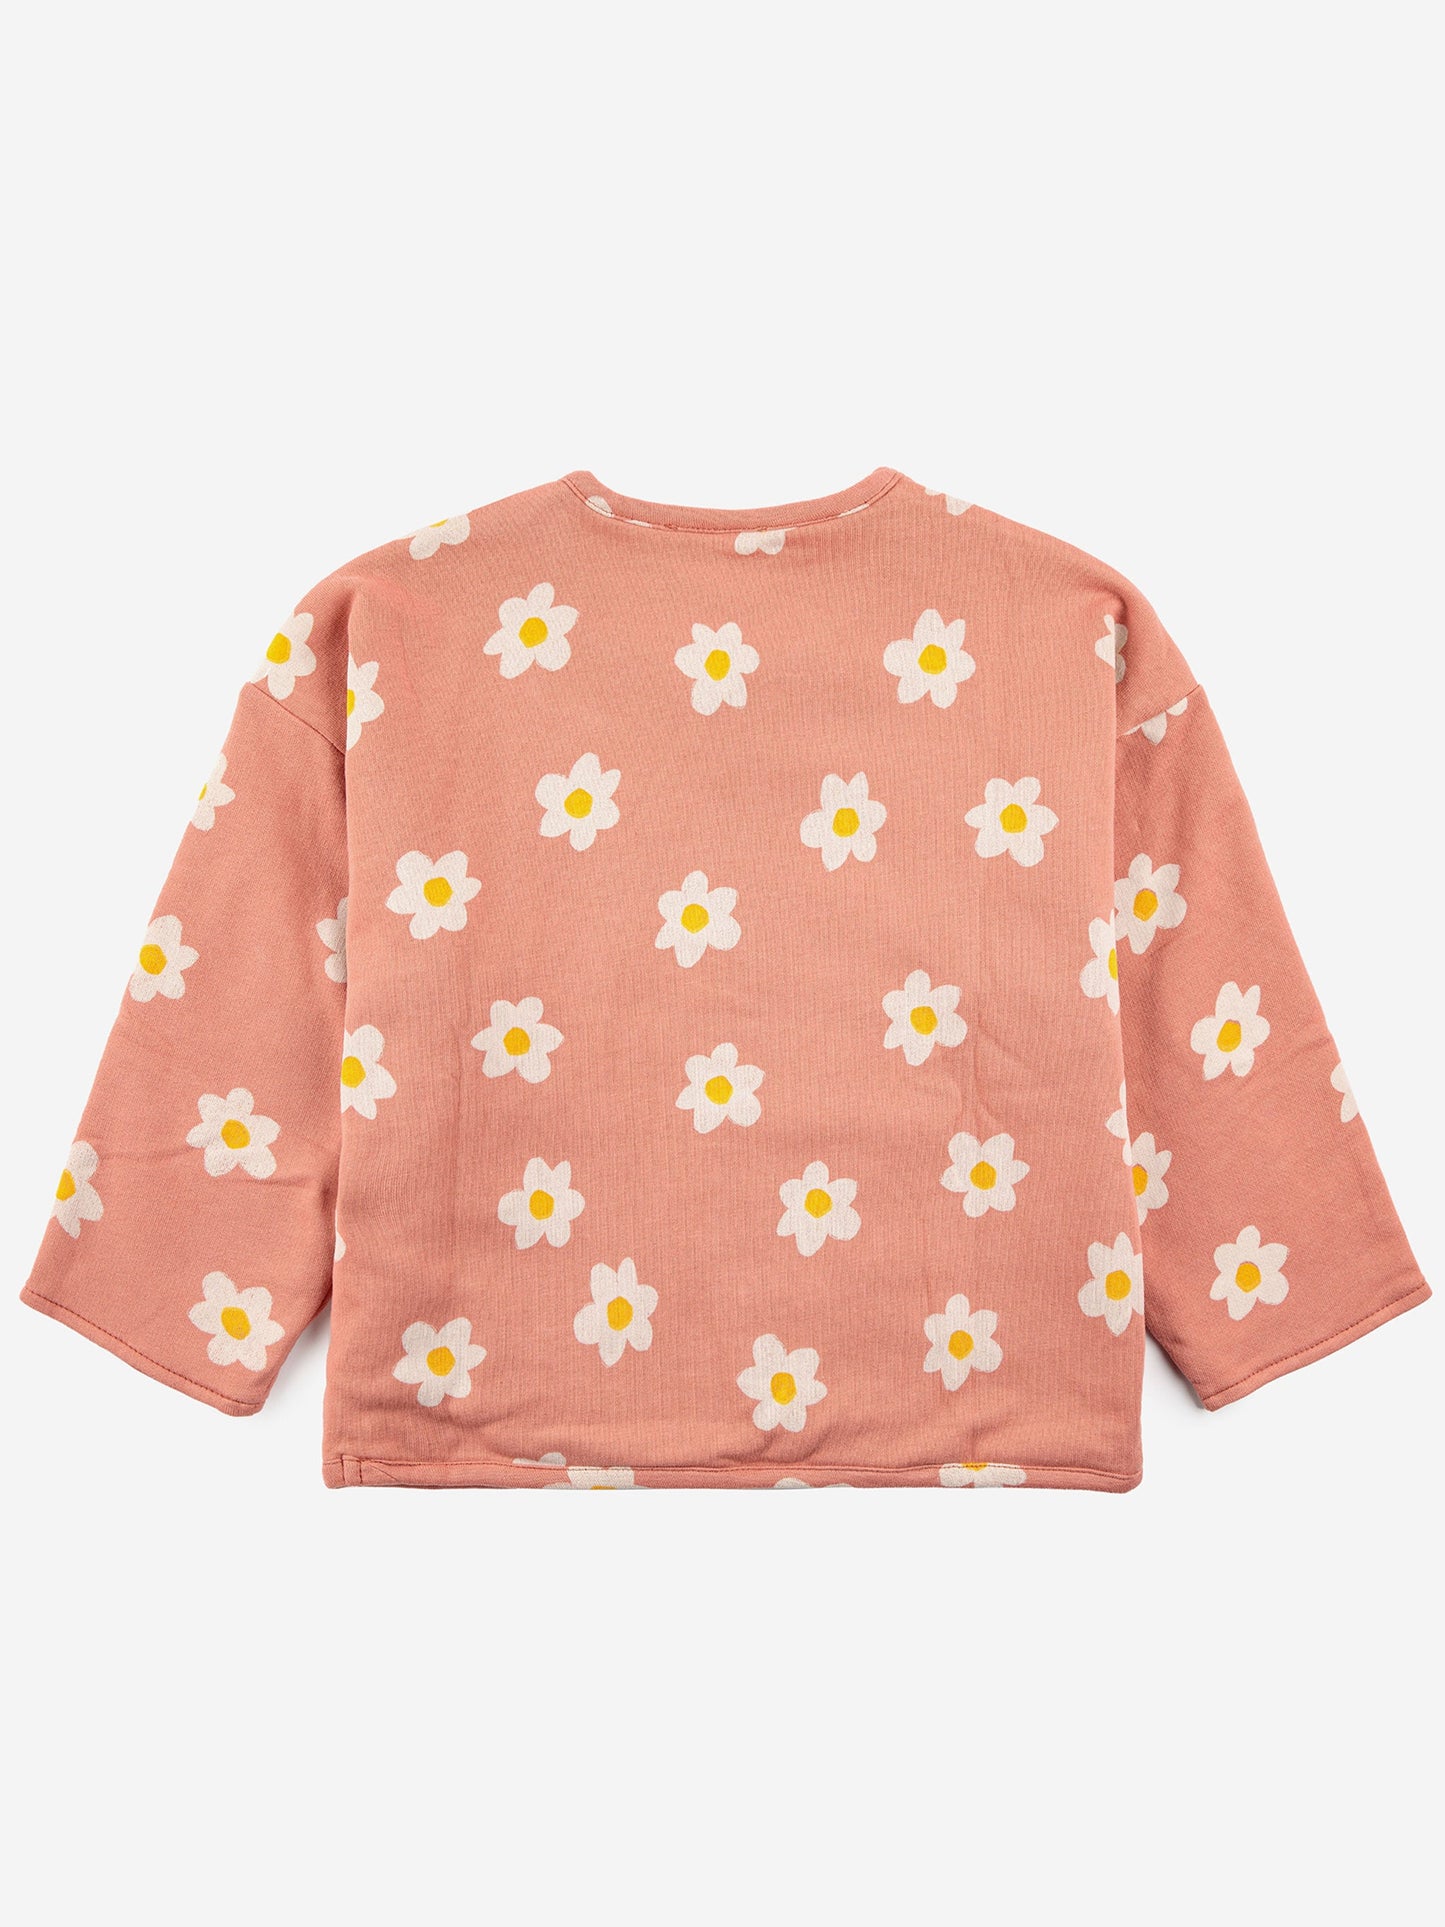 Bobo Choses Baby Little Flower Buttoned Sweatshirt - 95% organic cotton 5% elastane salmon pink sweatshirt. Designed with long sleeves, dropped shoulder, front snap fastening, lining and patch pocket. It has a loose fit. Made in Portugal.